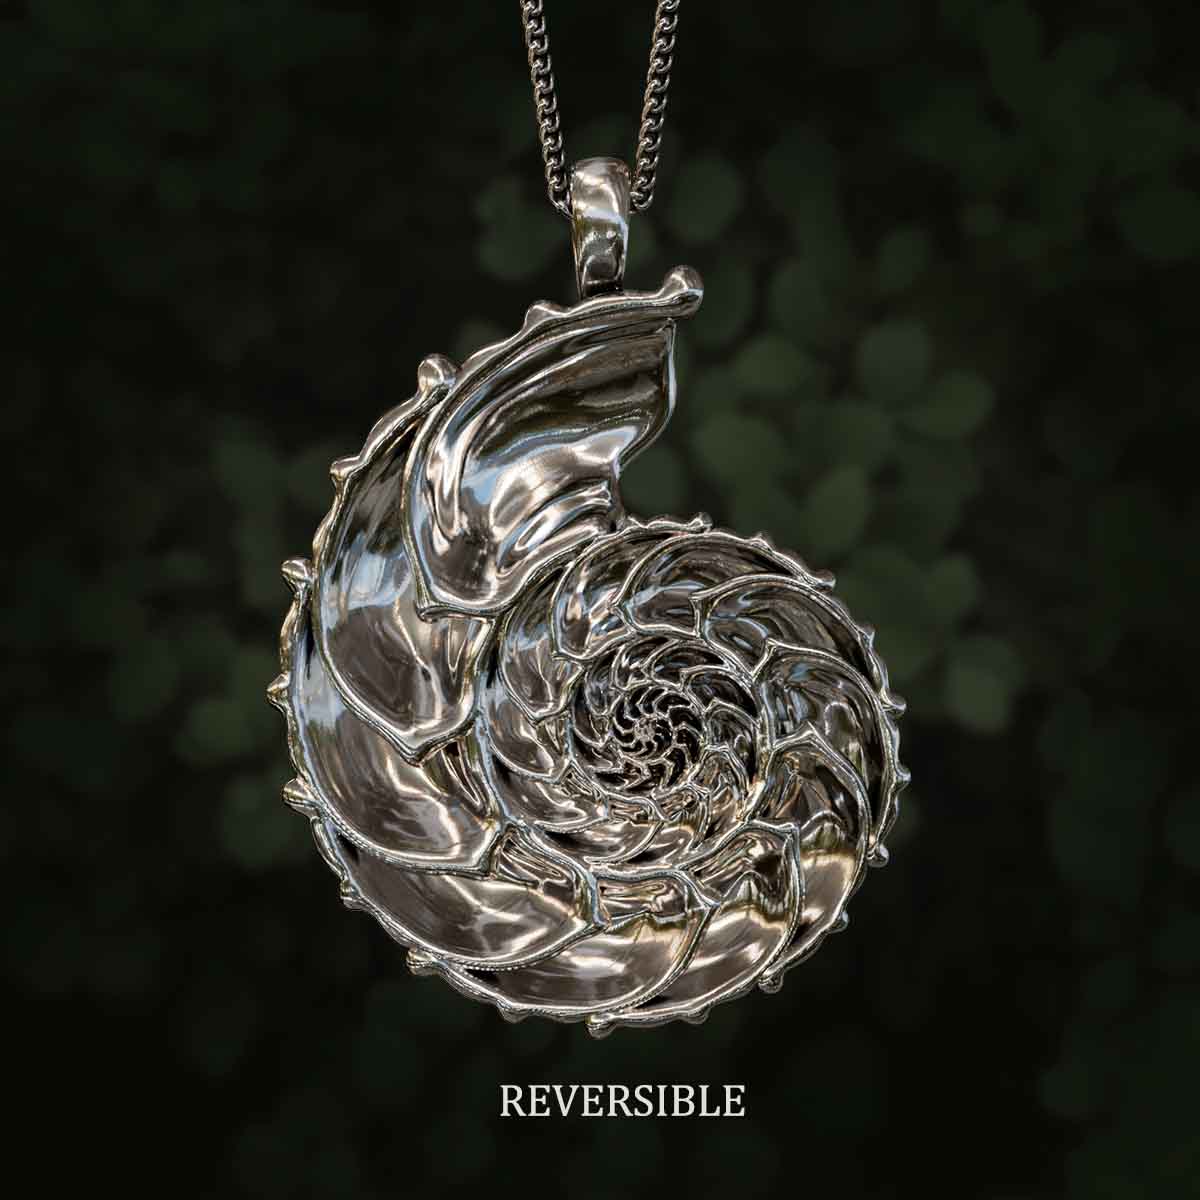 This pendant is reversible. 